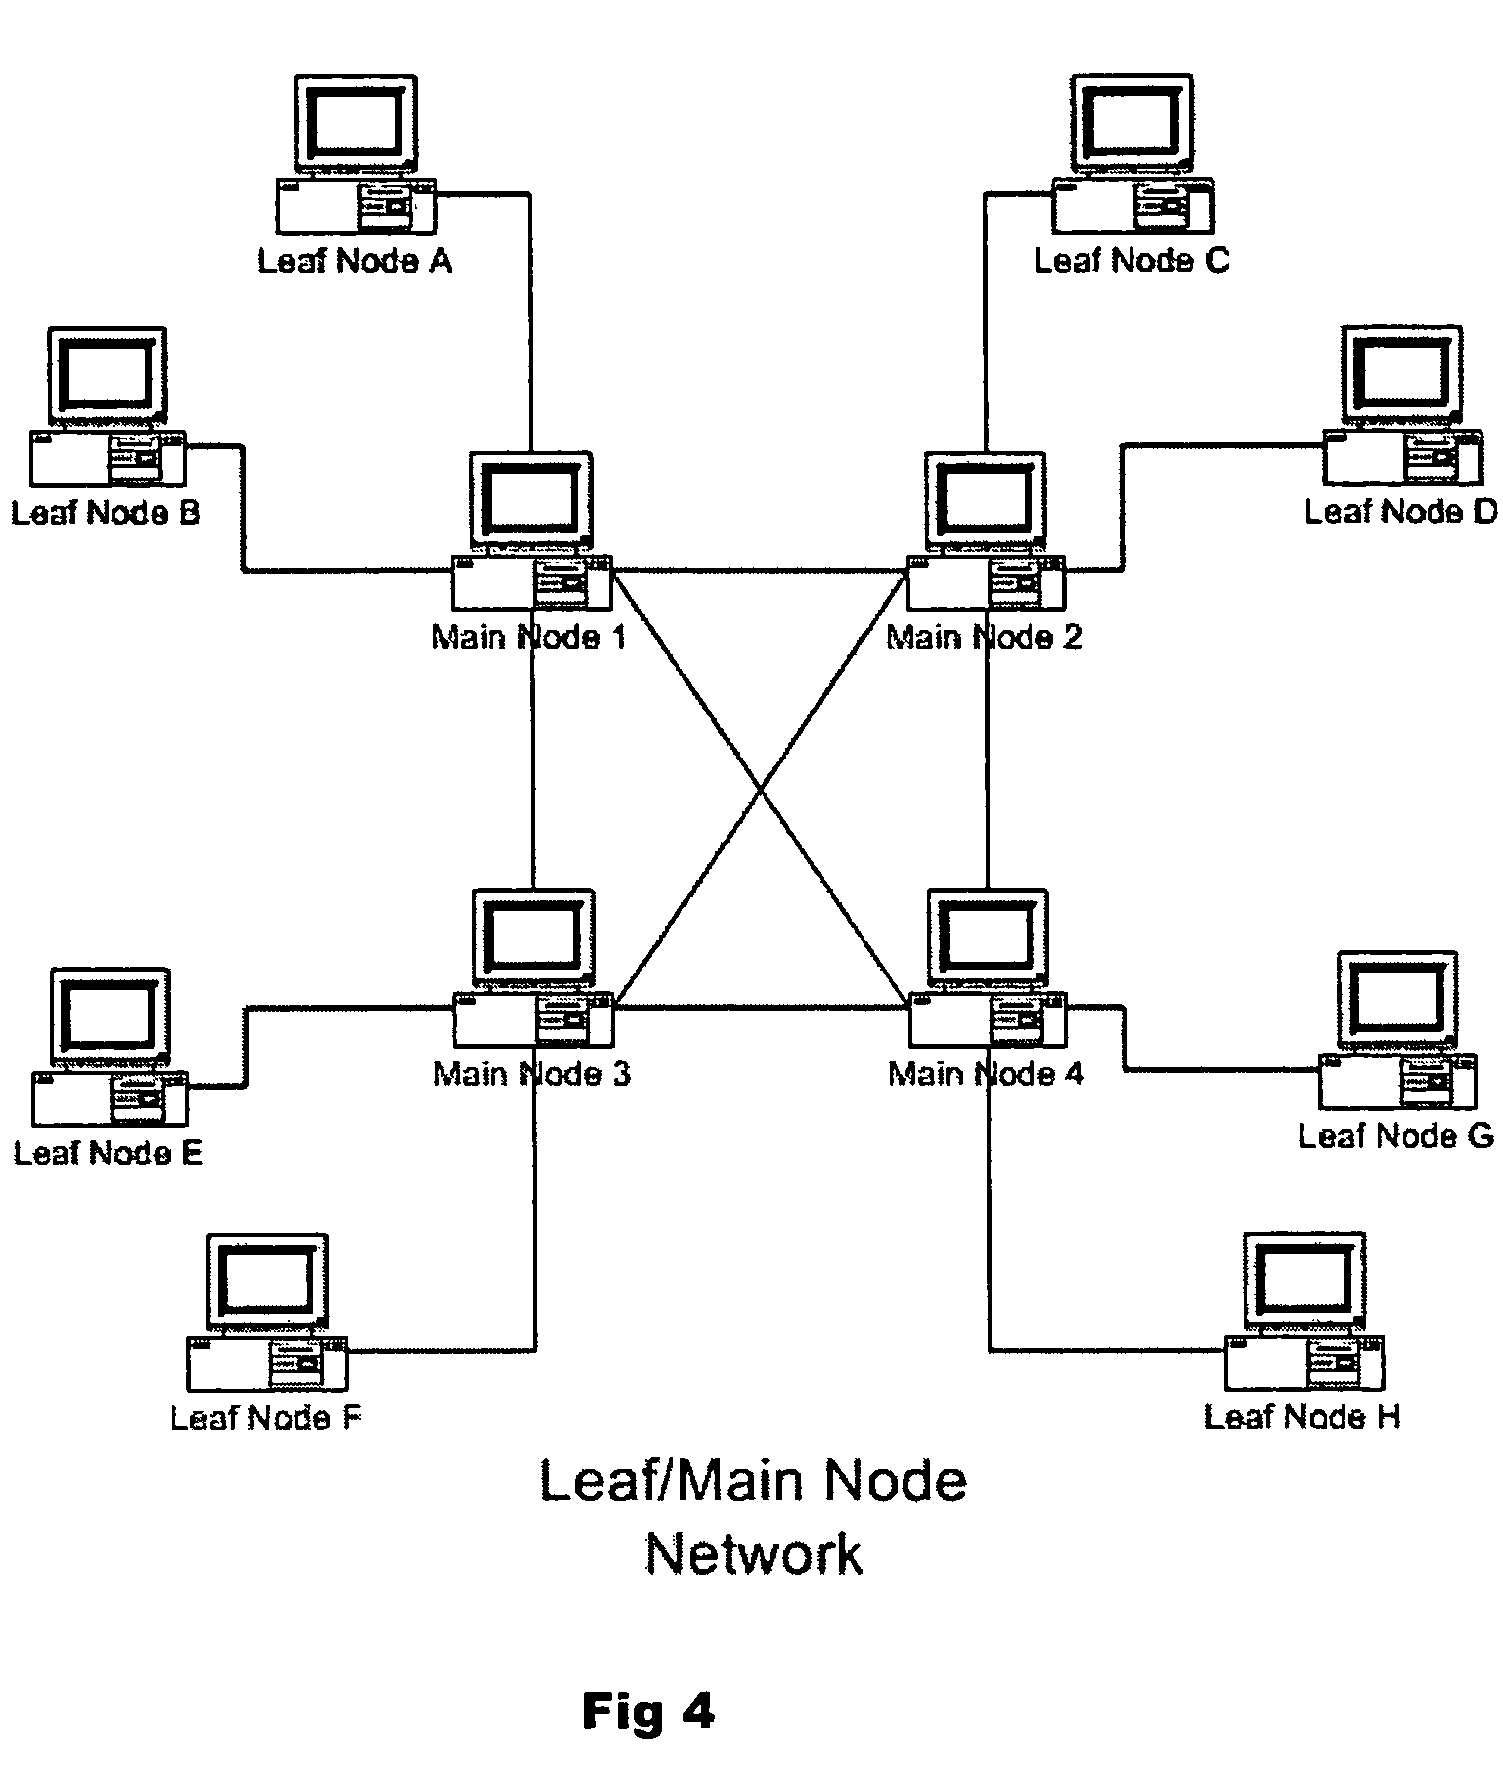 Method for monitoring and providing information over a peer to peer network